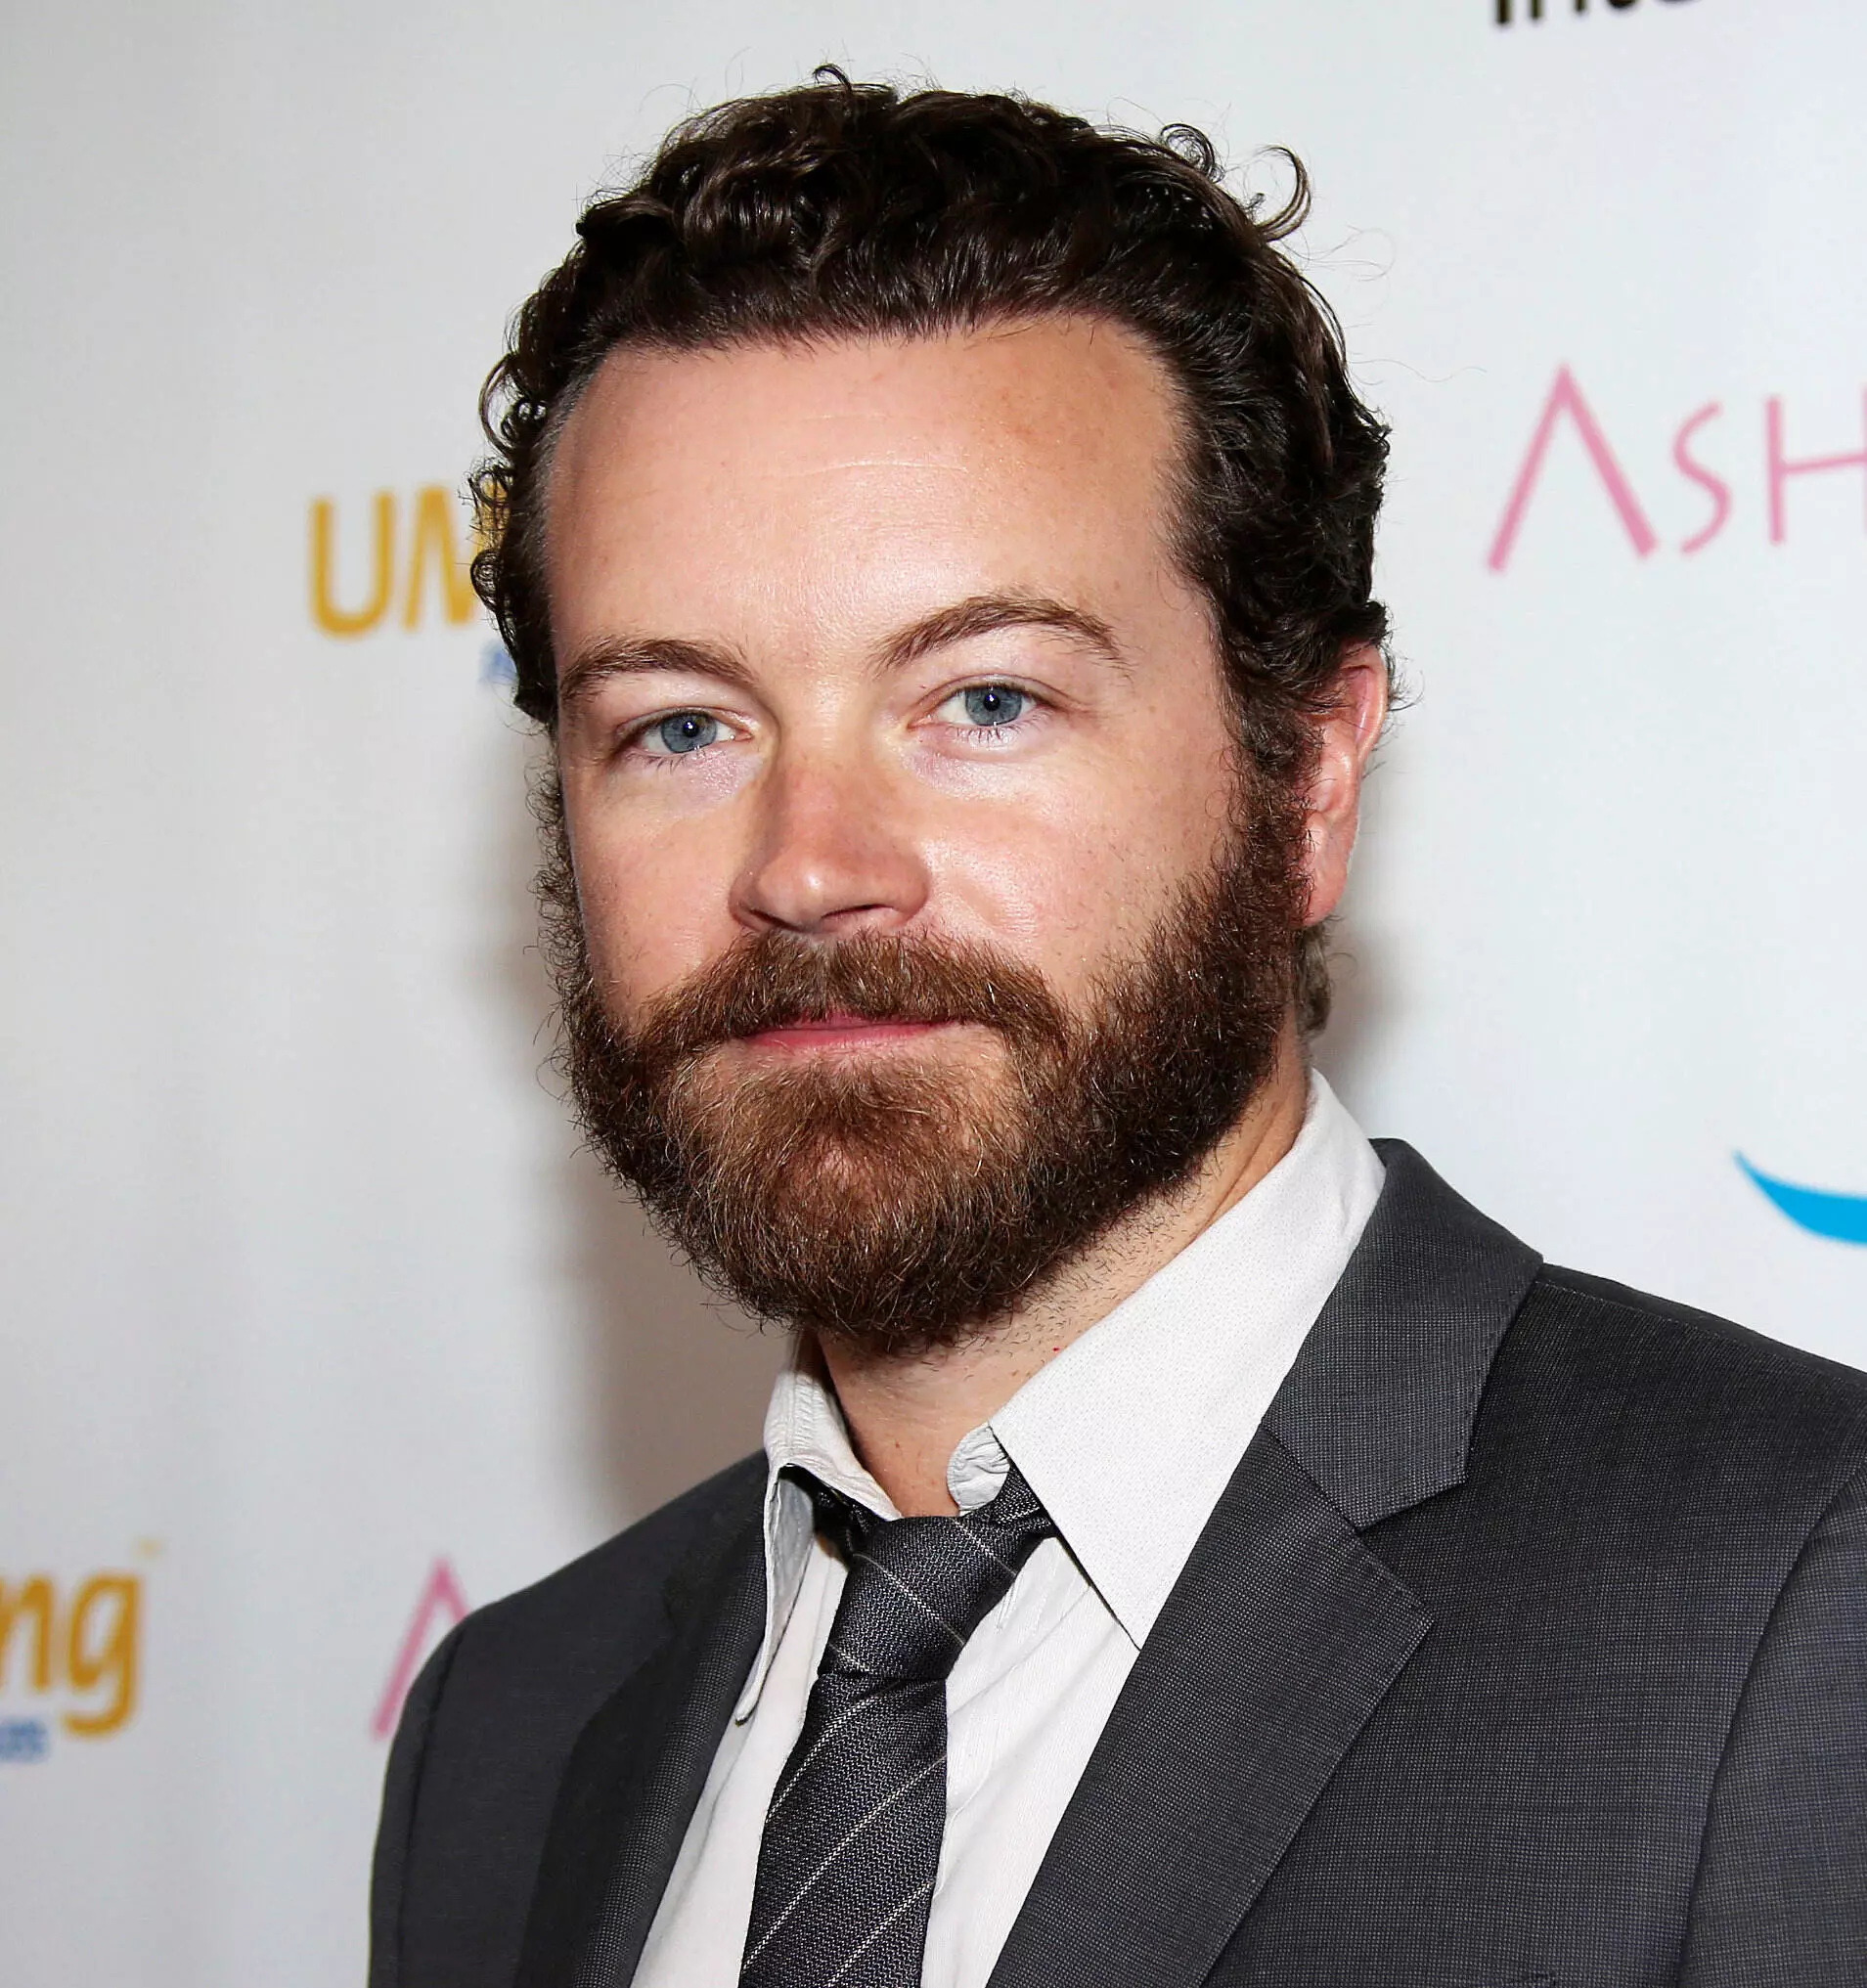 Actor: Danny Masterson charged with rape